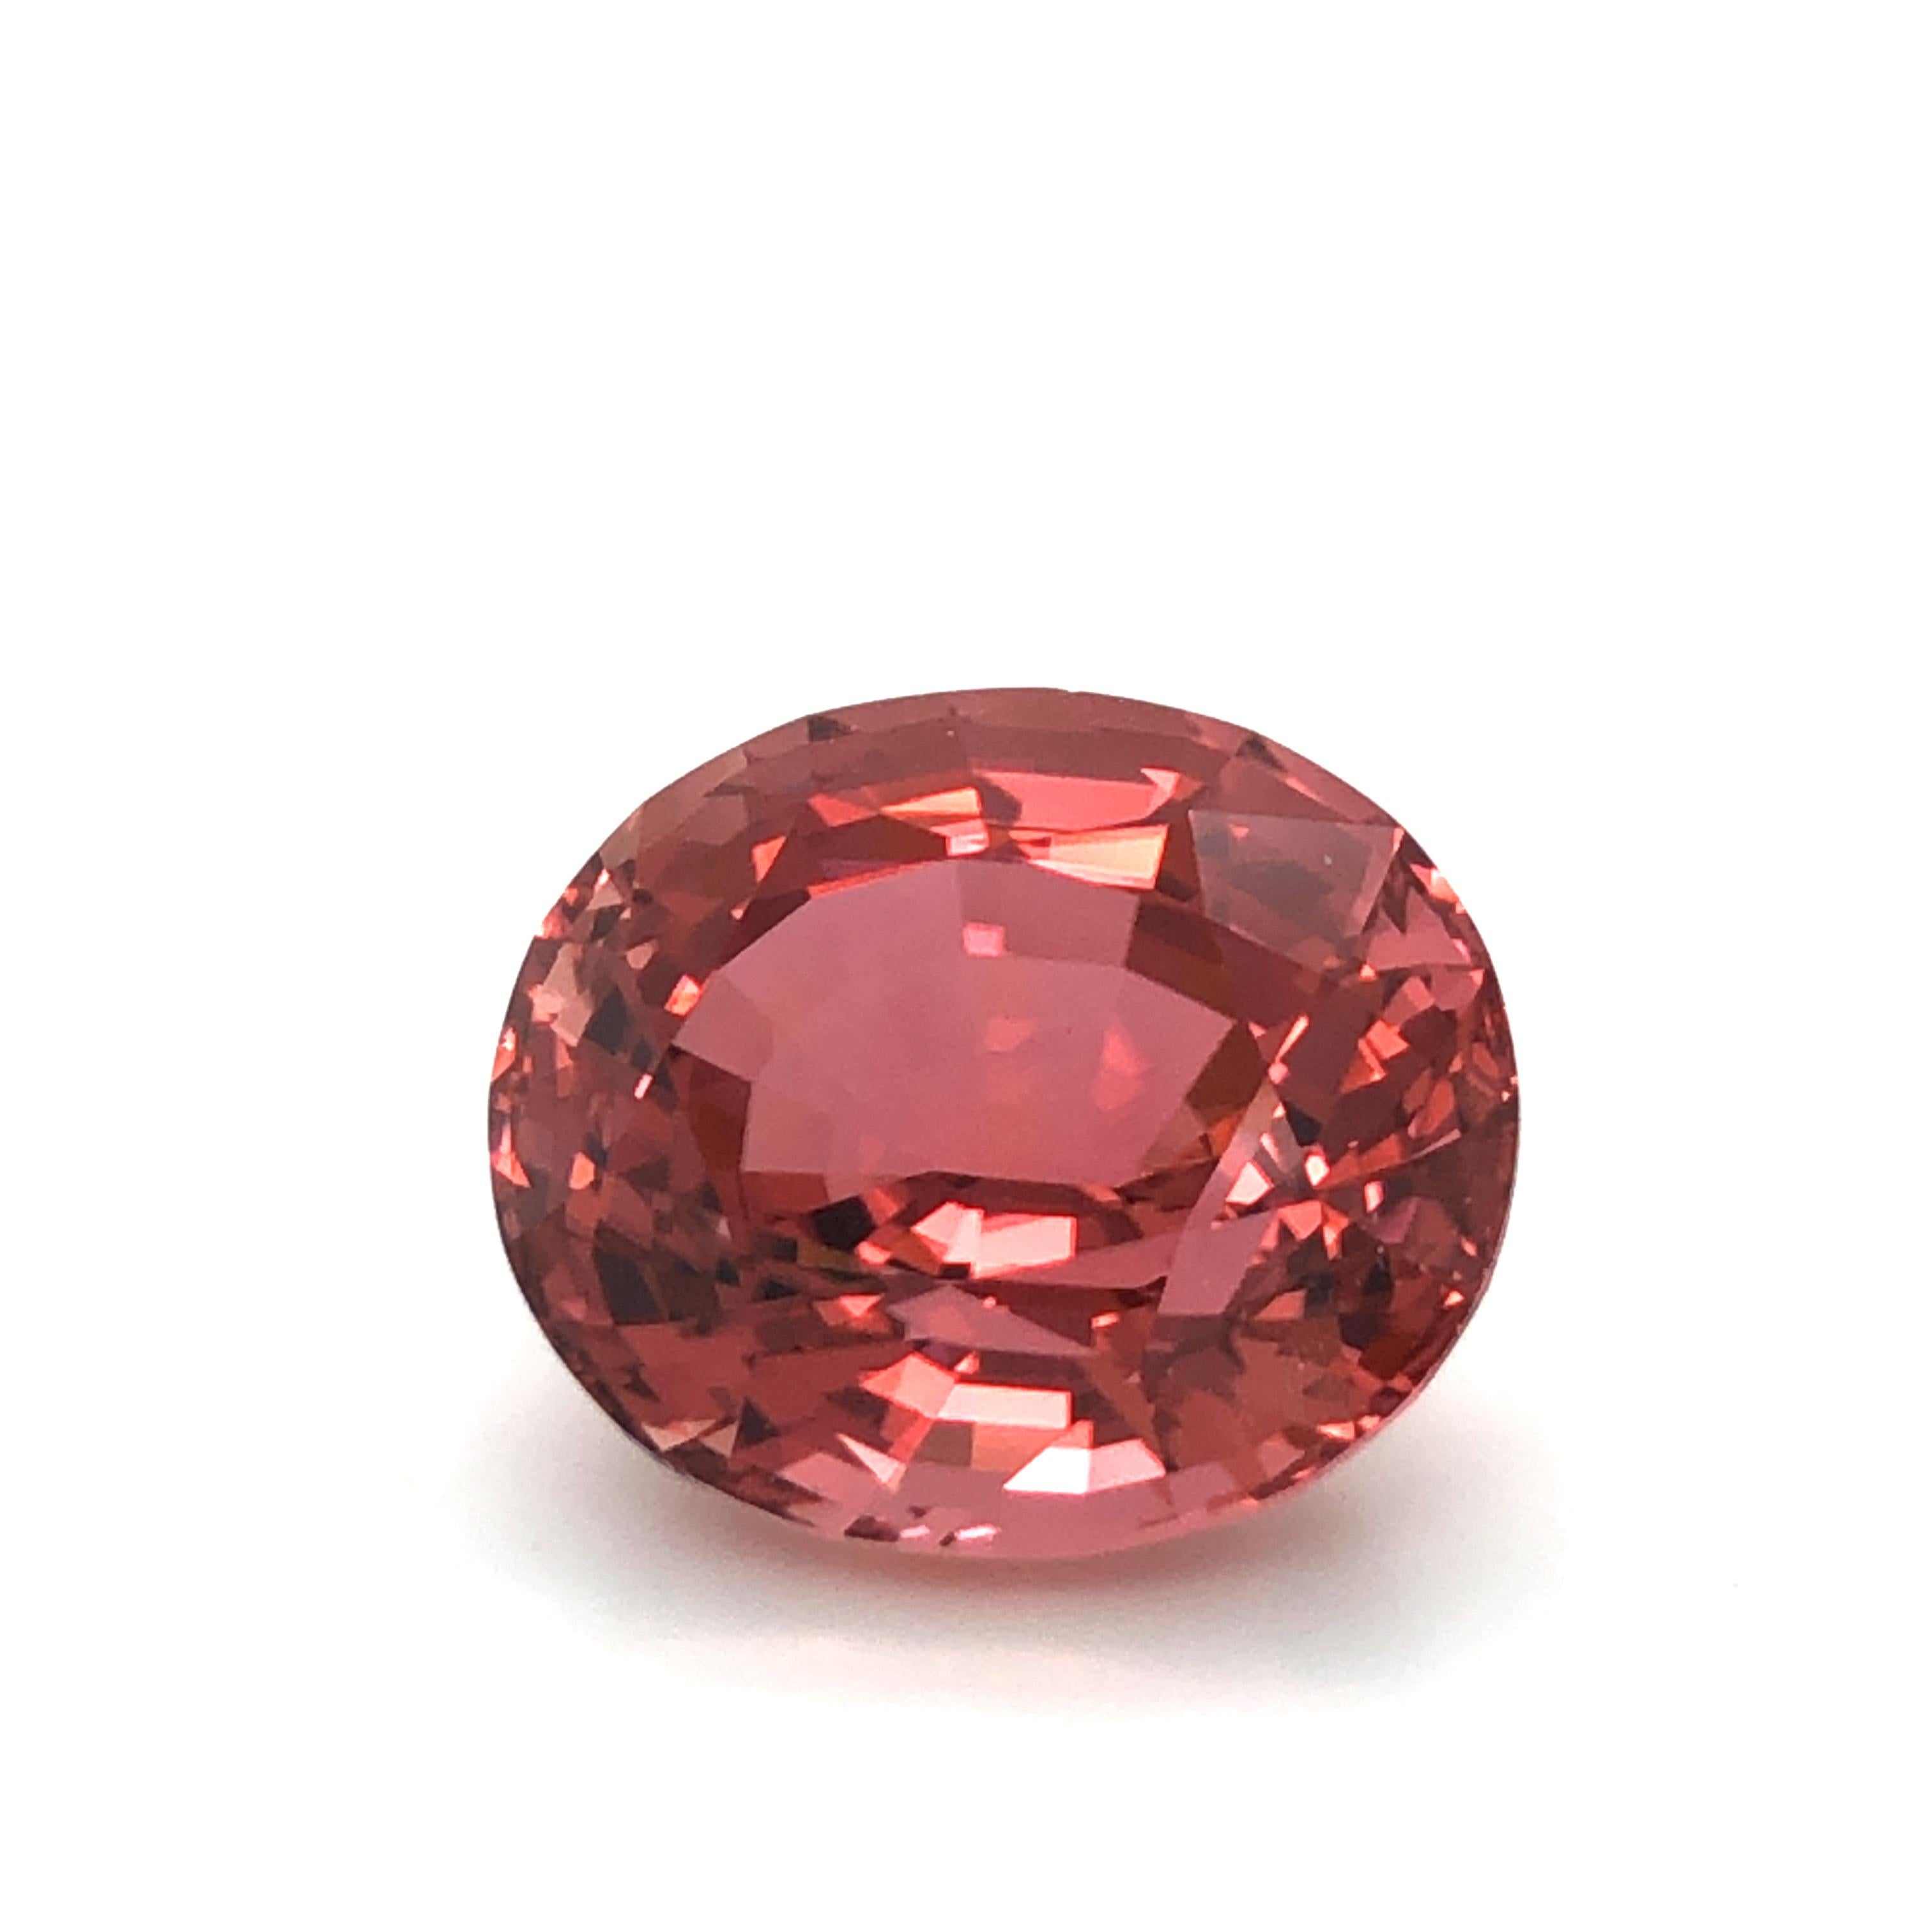 Very unique salmon coloured Tourmaline. The rare shade is a mix orange and pink hues evenly distributed throughout the stone. Tourmaline come in all kind of colours but we have not come along many species of this smoothing tone – especially not in